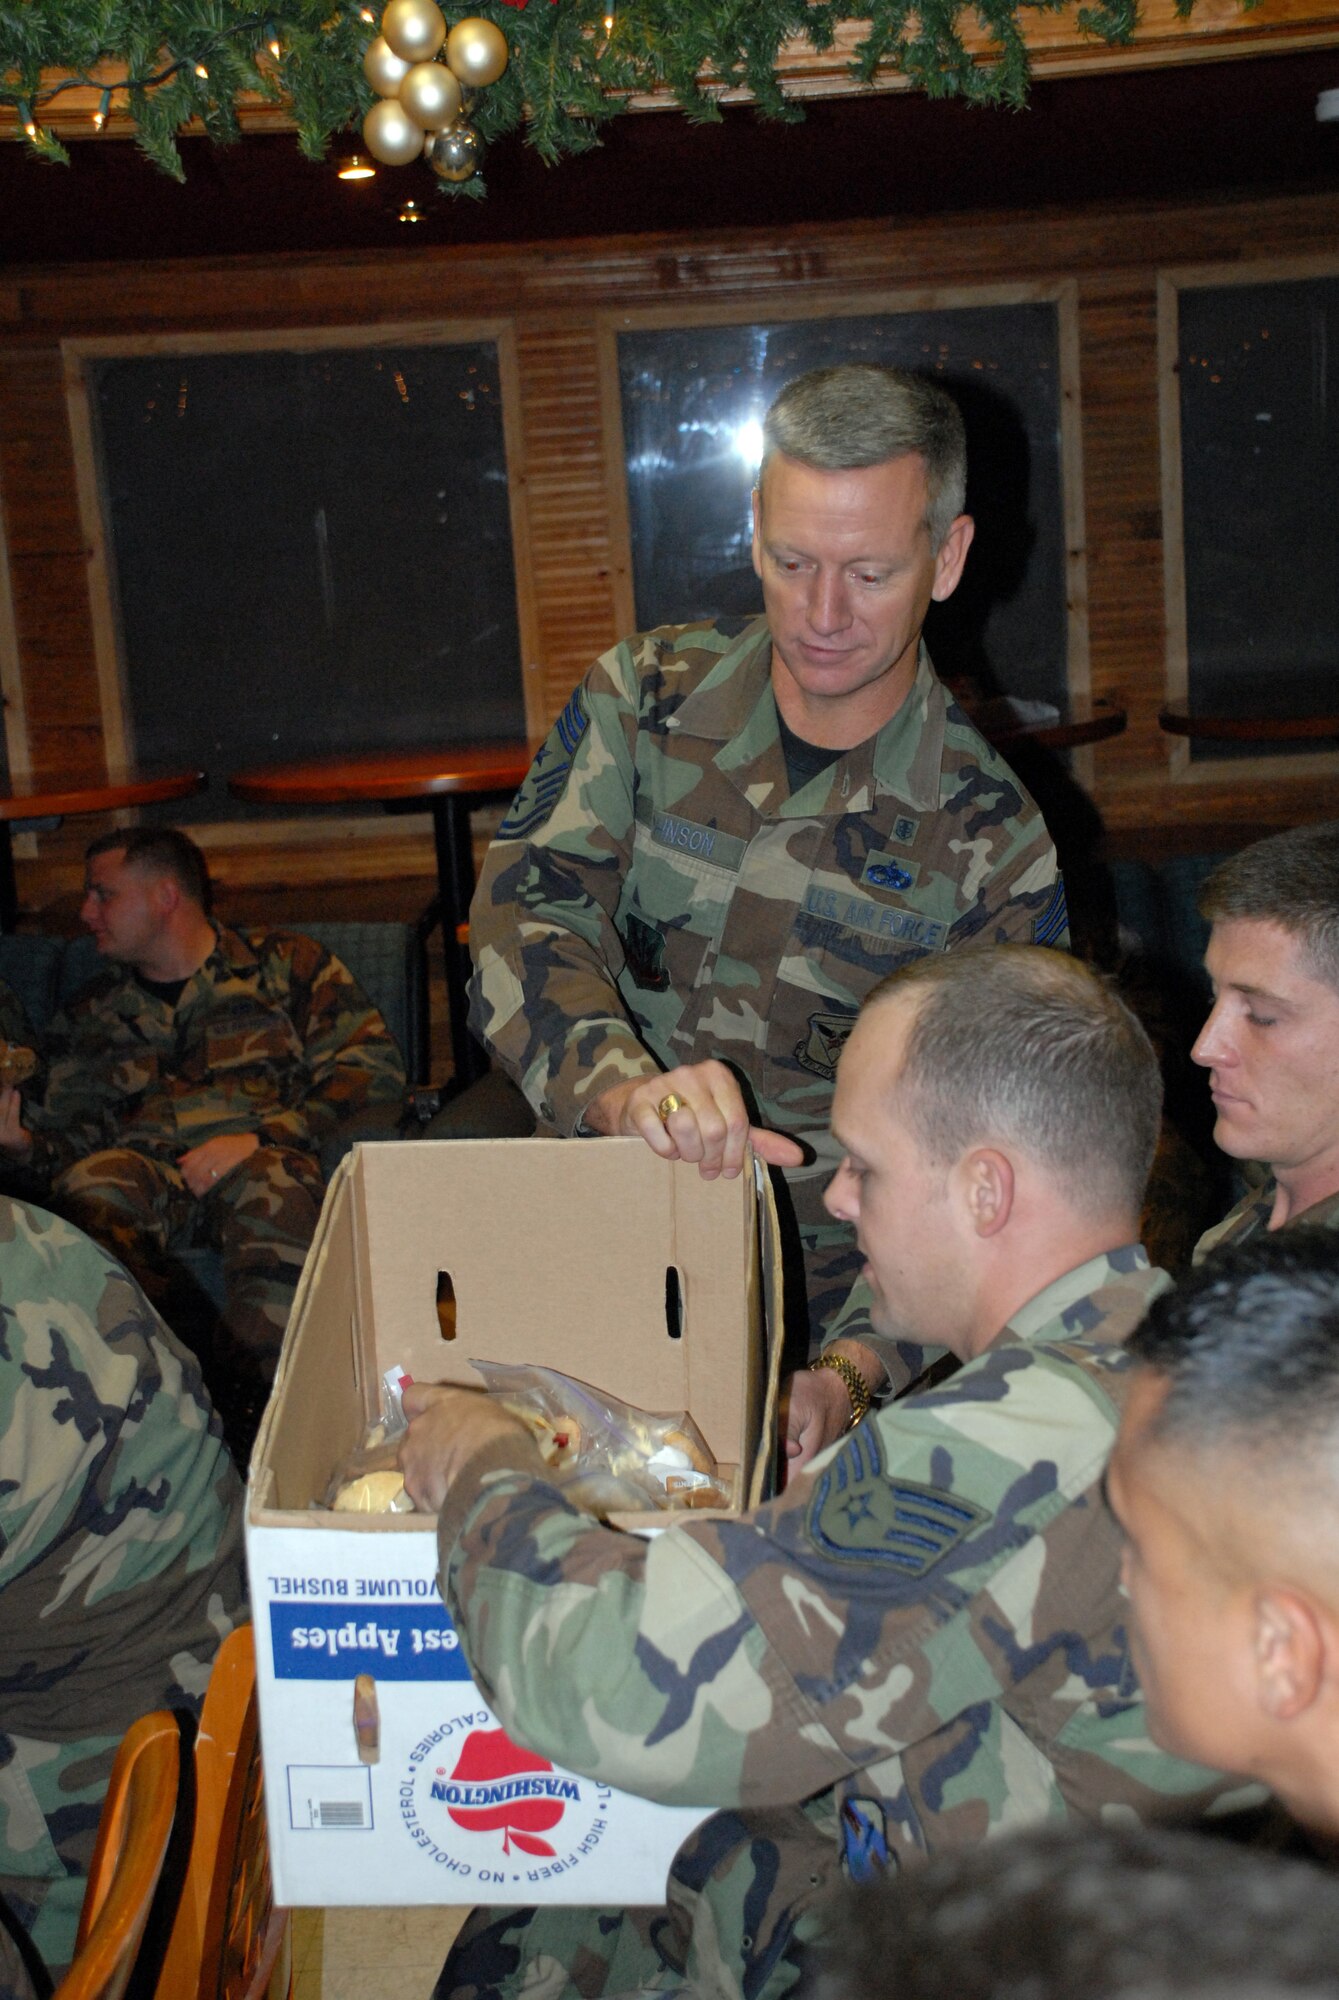 SOTO CANO AIR BASE, Honduras -- Air Force Chief Master Sgt. Wade Johnson, Command Chief for 12th Air Force, delivers cookies to servicemembers from Joint Task Force-Bravo at Soto Cano Air Base, Honduras, Dec. 11.  Chief Johnson came with the ?Cookie Caper? morale mission, which allowed 12th Air Force leaders to visit with deployed servicemembers prior to the holidays. The team delivered more than 9,000 cookies to Honduras, the Netherlands Antilles, Puerto Rico, and Guantanamo Bay Naval Station, Cuba. (U.S. Air Force photo by Tech. Sgt. Sonny Cohrs)